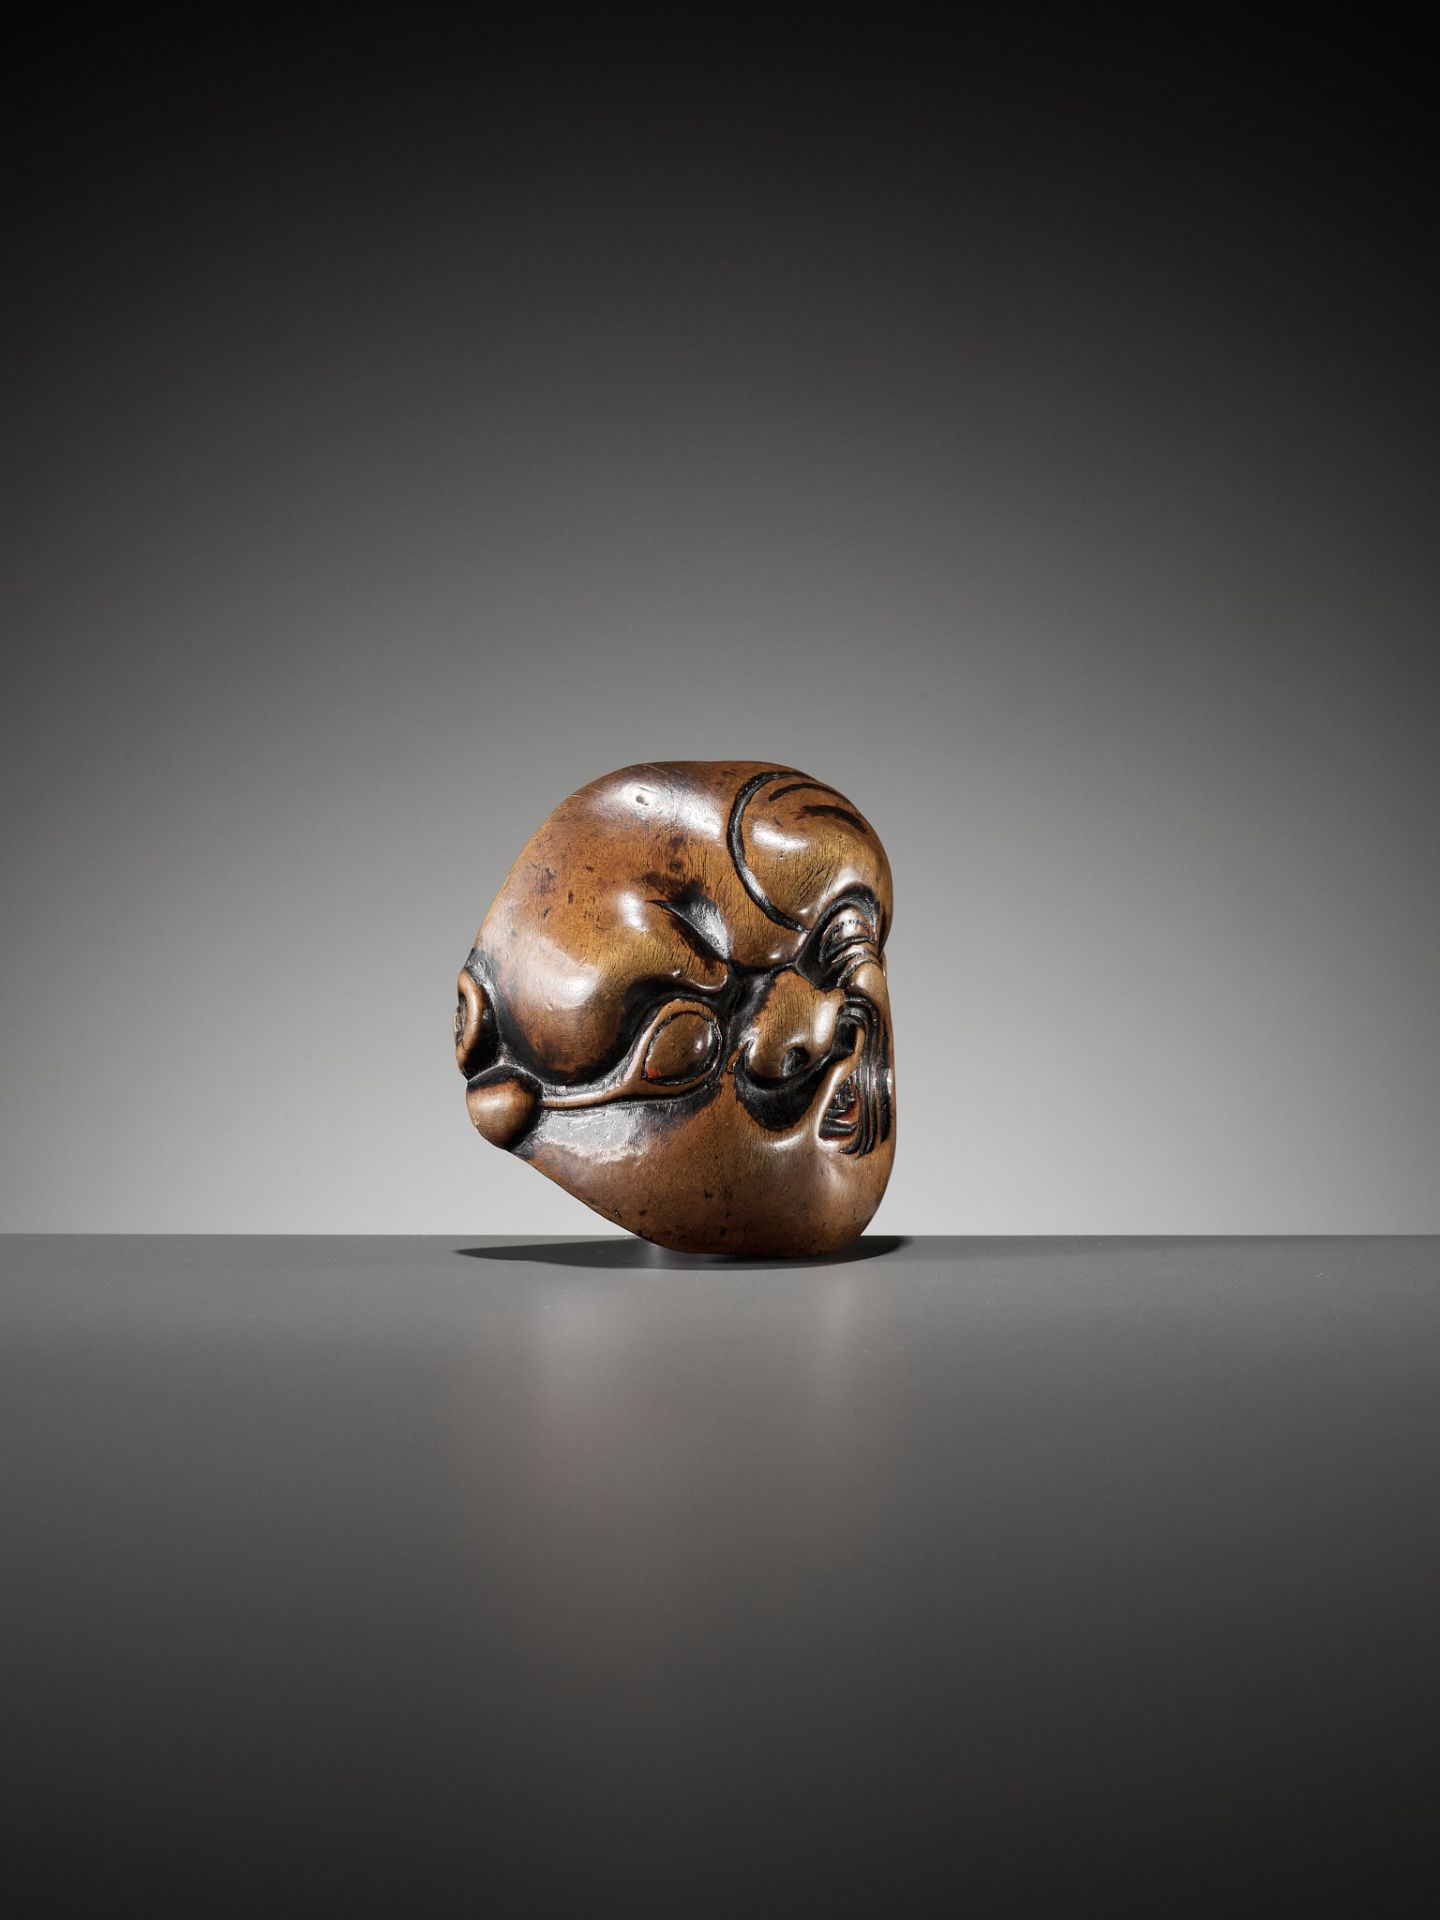 AN IMPORTANT EARLY WOOD MASK NETSUKE DEPICTING A GRIMACING MAN - Image 7 of 9